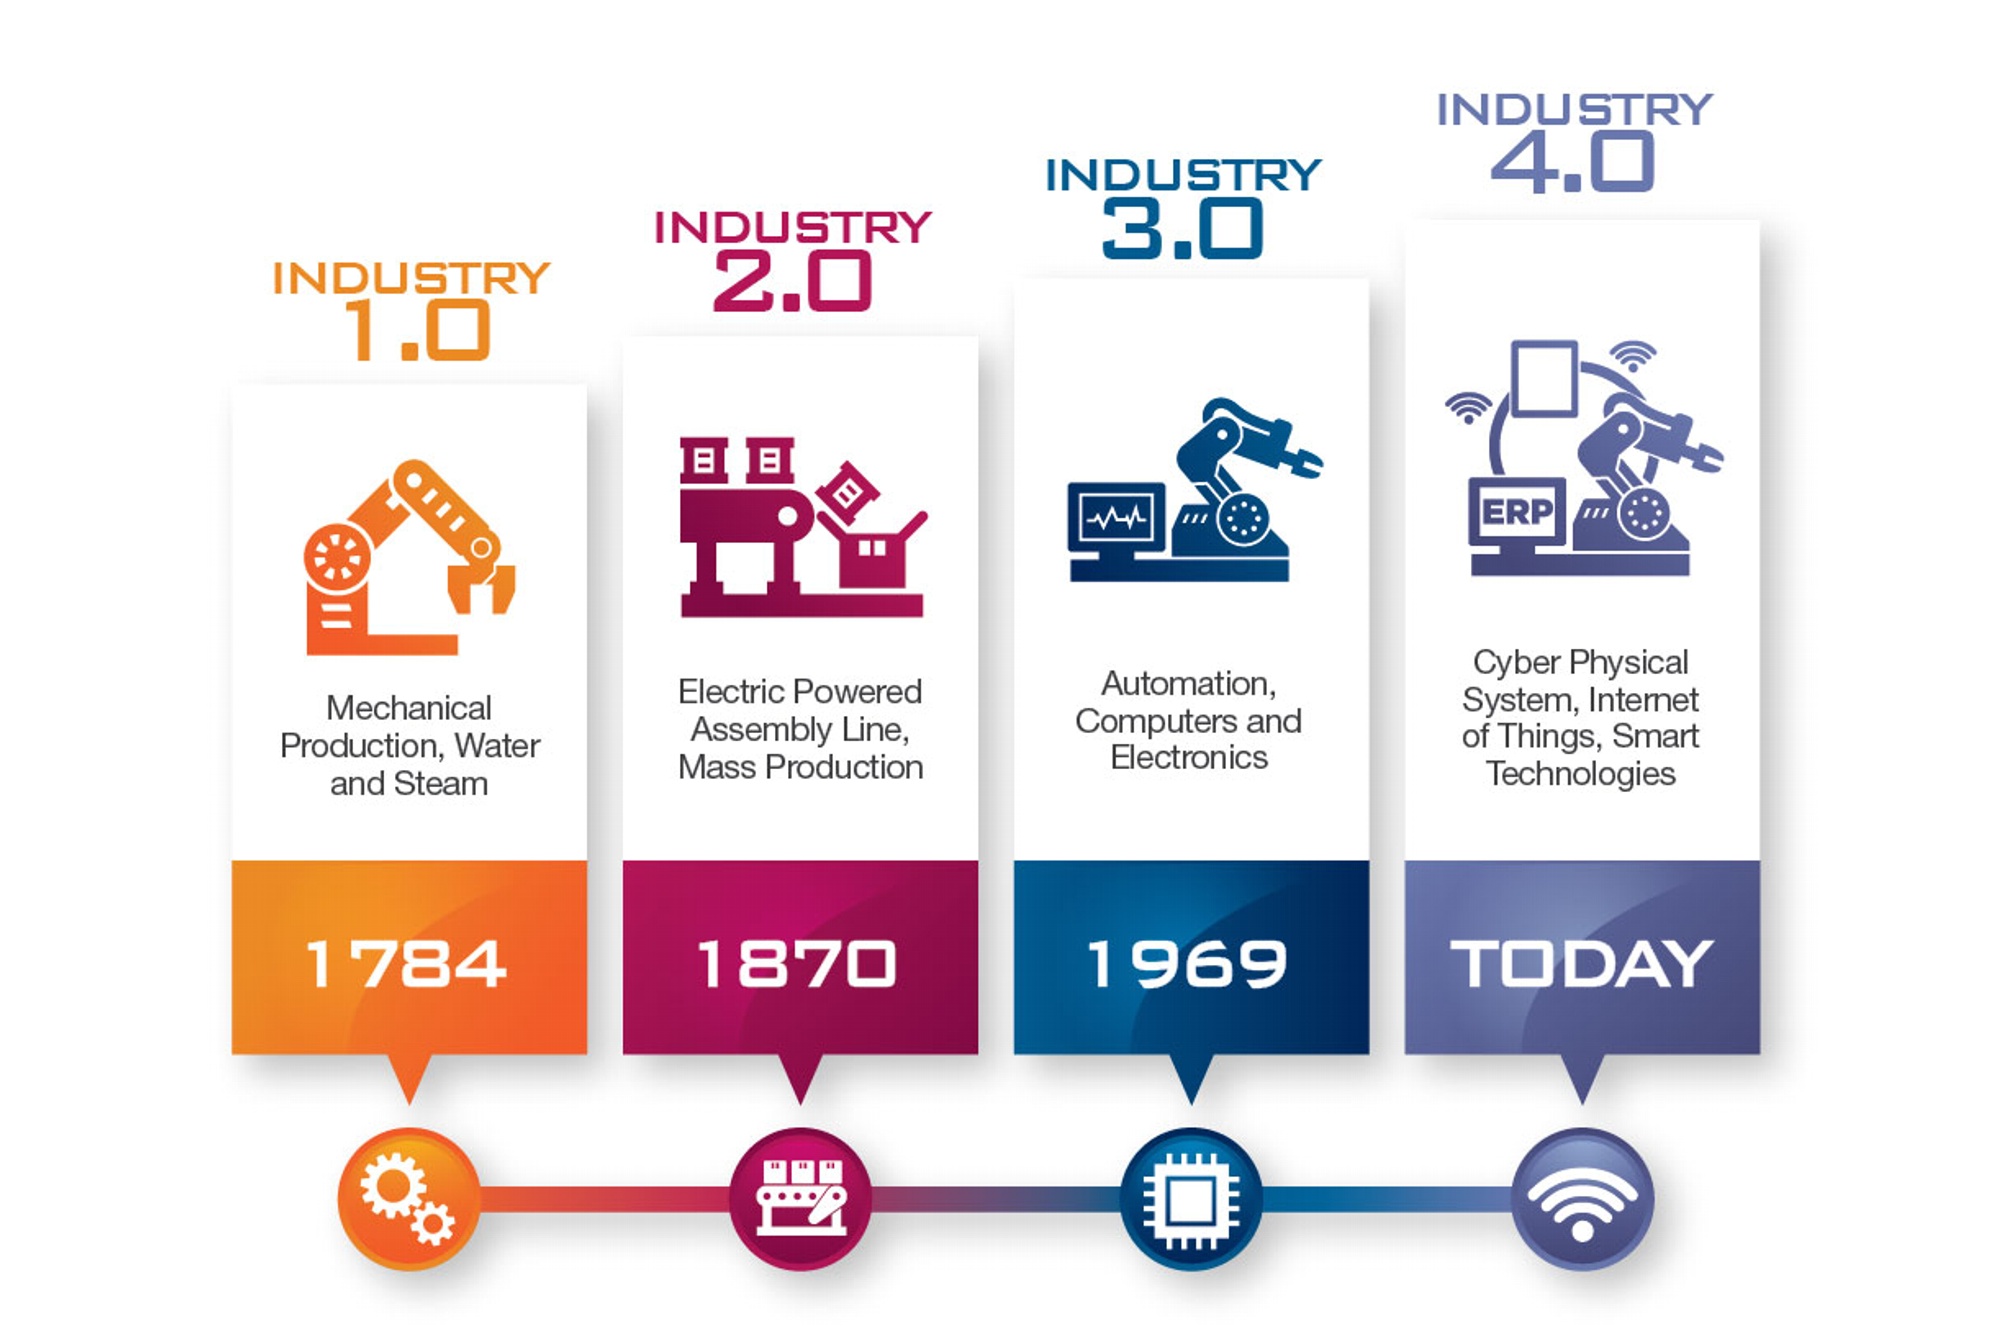 Industry 4.0 in Italy: A competitive market